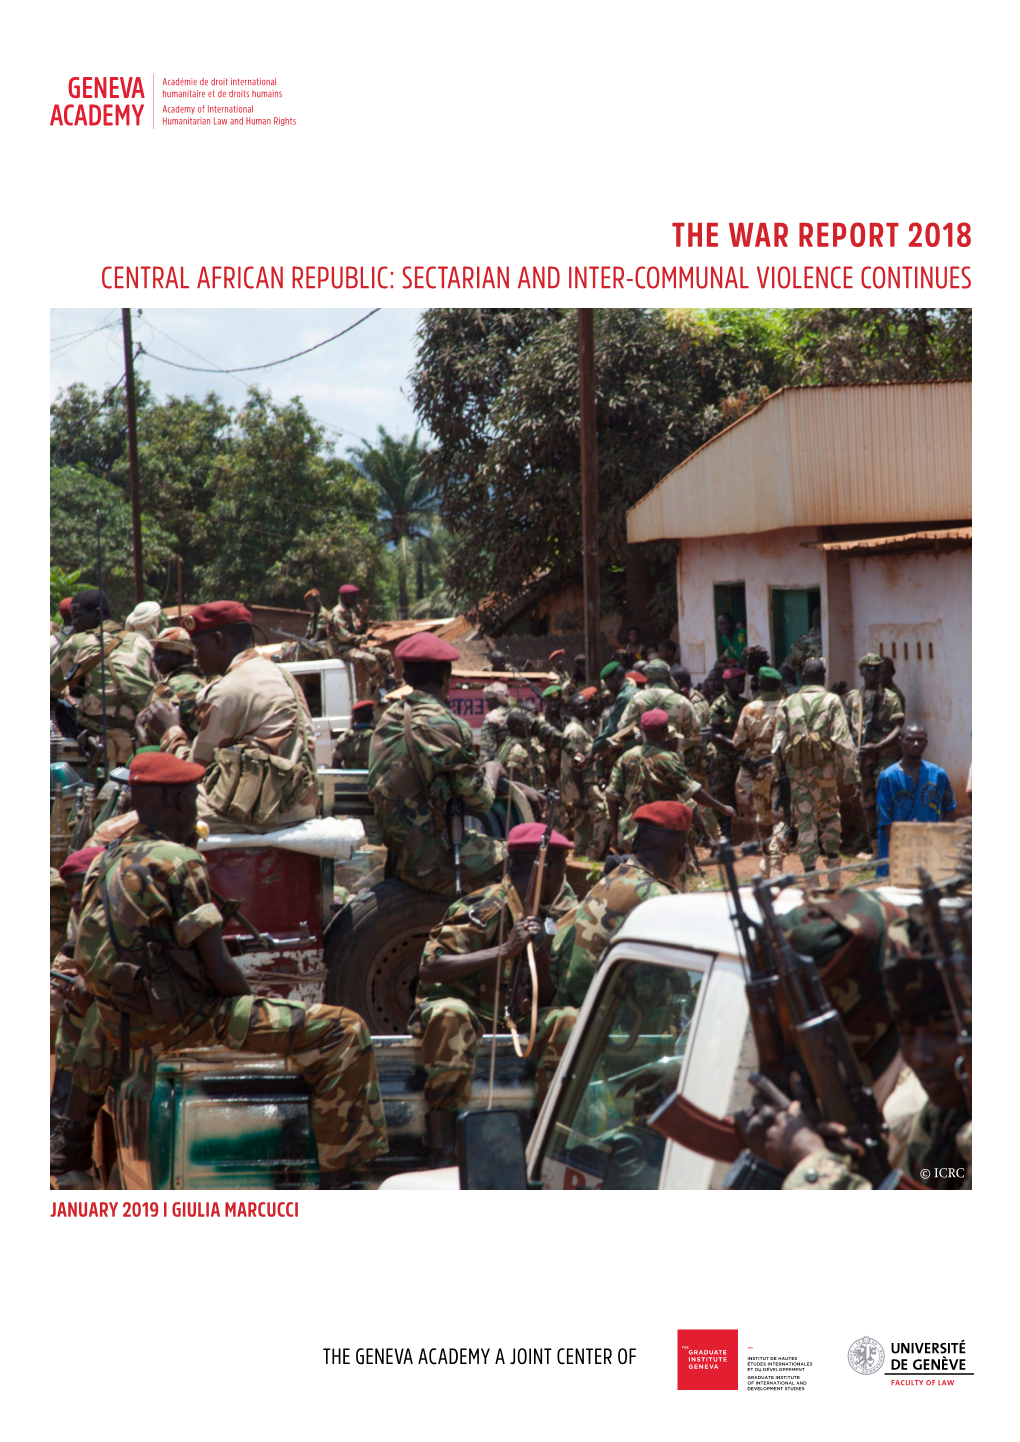 Central African Republic: Sectarian and Inter-Communal Violence Continues